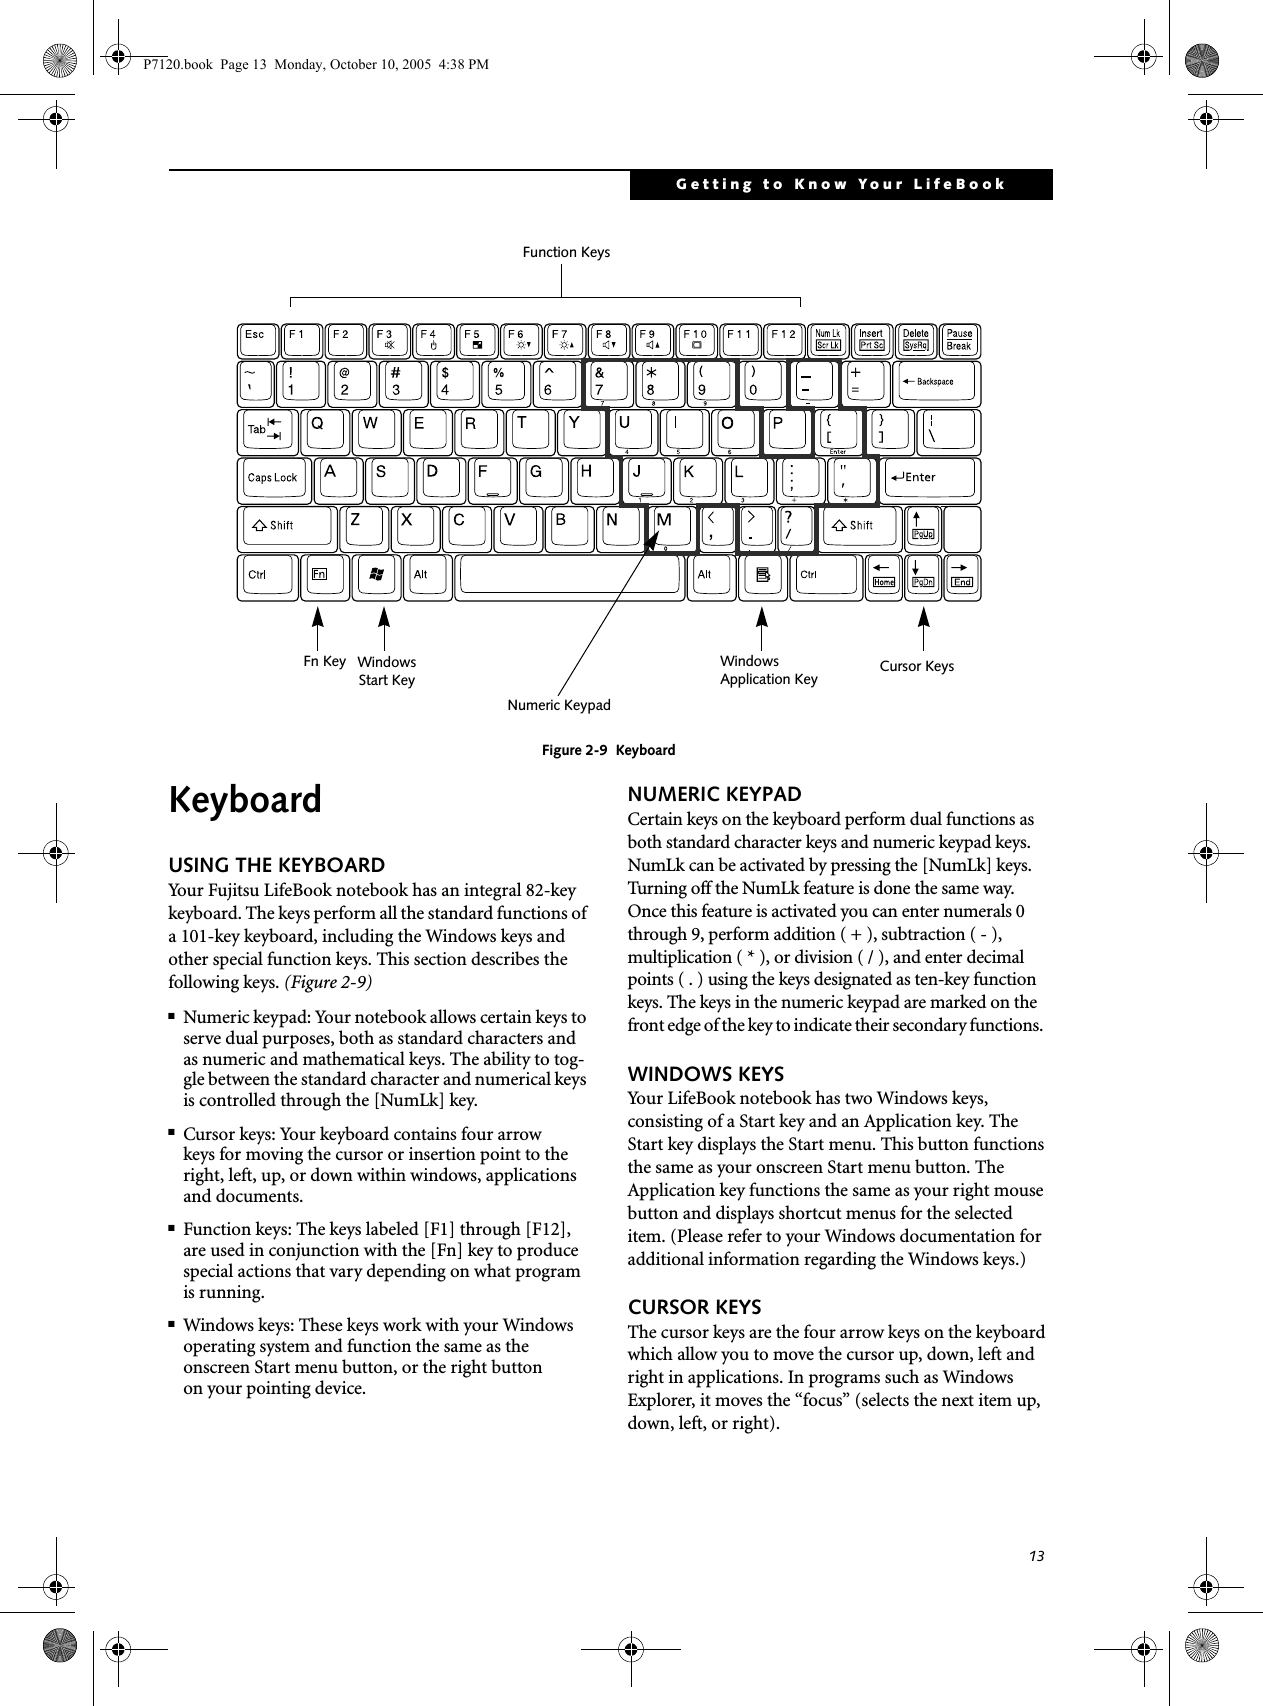 13Getting to Know Your LifeBookFigure 2-9  KeyboardKeyboard USING THE KEYBOARDYour Fujitsu LifeBook notebook has an integral 82-key keyboard. The keys perform all the standard functions of a 101-key keyboard, including the Windows keys and other special function keys. This section describes the following keys. (Figure 2-9)■Numeric keypad: Your notebook allows certain keys to serve dual purposes, both as standard characters and as numeric and mathematical keys. The ability to tog-gle between the standard character and numerical keys is controlled through the [NumLk] key.■Cursor keys: Your keyboard contains four arrowkeys for moving the cursor or insertion point to the right, left, up, or down within windows, applications and documents. ■Function keys: The keys labeled [F1] through [F12], are used in conjunction with the [Fn] key to produce special actions that vary depending on what program is running. ■Windows keys: These keys work with your Windows operating system and function the same as the onscreen Start menu button, or the right buttonon your pointing device.NUMERIC KEYPADCertain keys on the keyboard perform dual functions as both standard character keys and numeric keypad keys. NumLk can be activated by pressing the [NumLk] keys. Turning off the NumLk feature is done the same way. Once this feature is activated you can enter numerals 0 through 9, perform addition ( + ), subtraction ( - ),multiplication ( * ), or division ( / ), and enter decimal points ( . ) using the keys designated as ten-key function keys. The keys in the numeric keypad are marked on the front edge of the key to indicate their secondary functions.  WINDOWS KEYSYour LifeBook notebook has two Windows keys, consisting of a Start key and an Application key. The Start key displays the Start menu. This button functions the same as your onscreen Start menu button. The Application key functions the same as your right mouse button and displays shortcut menus for the selected item. (Please refer to your Windows documentation for additional information regarding the Windows keys.) CURSOR KEYSThe cursor keys are the four arrow keys on the keyboard which allow you to move the cursor up, down, left and right in applications. In programs such as Windows Explorer, it moves the “focus” (selects the next item up, down, left, or right). Fn Key WindowsFunction KeysNumeric KeypadCursor KeysWindowsApplication KeyStart Key  P7120.book  Page 13  Monday, October 10, 2005  4:38 PM